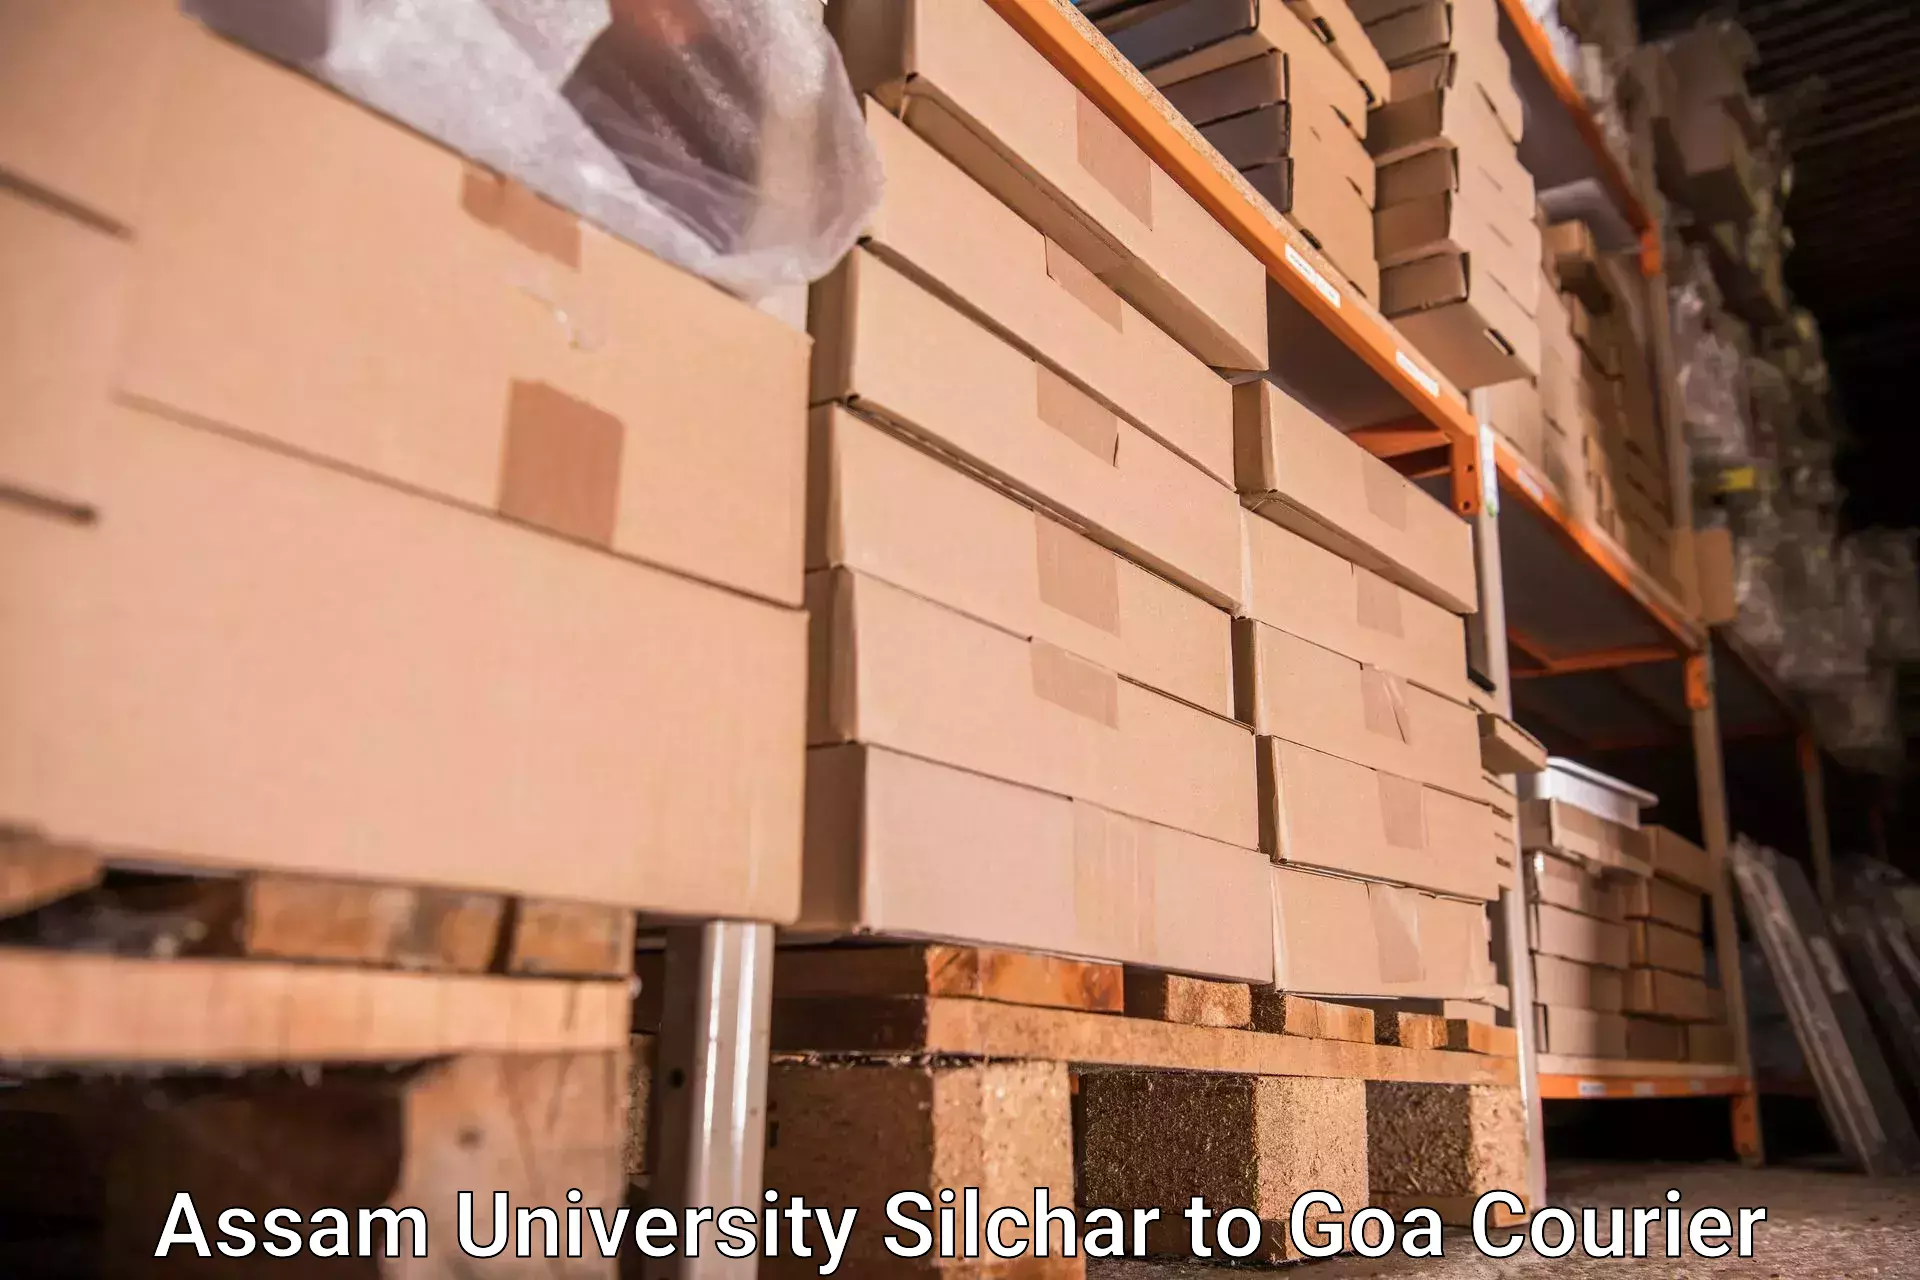 Luggage transport consulting Assam University Silchar to IIT Goa